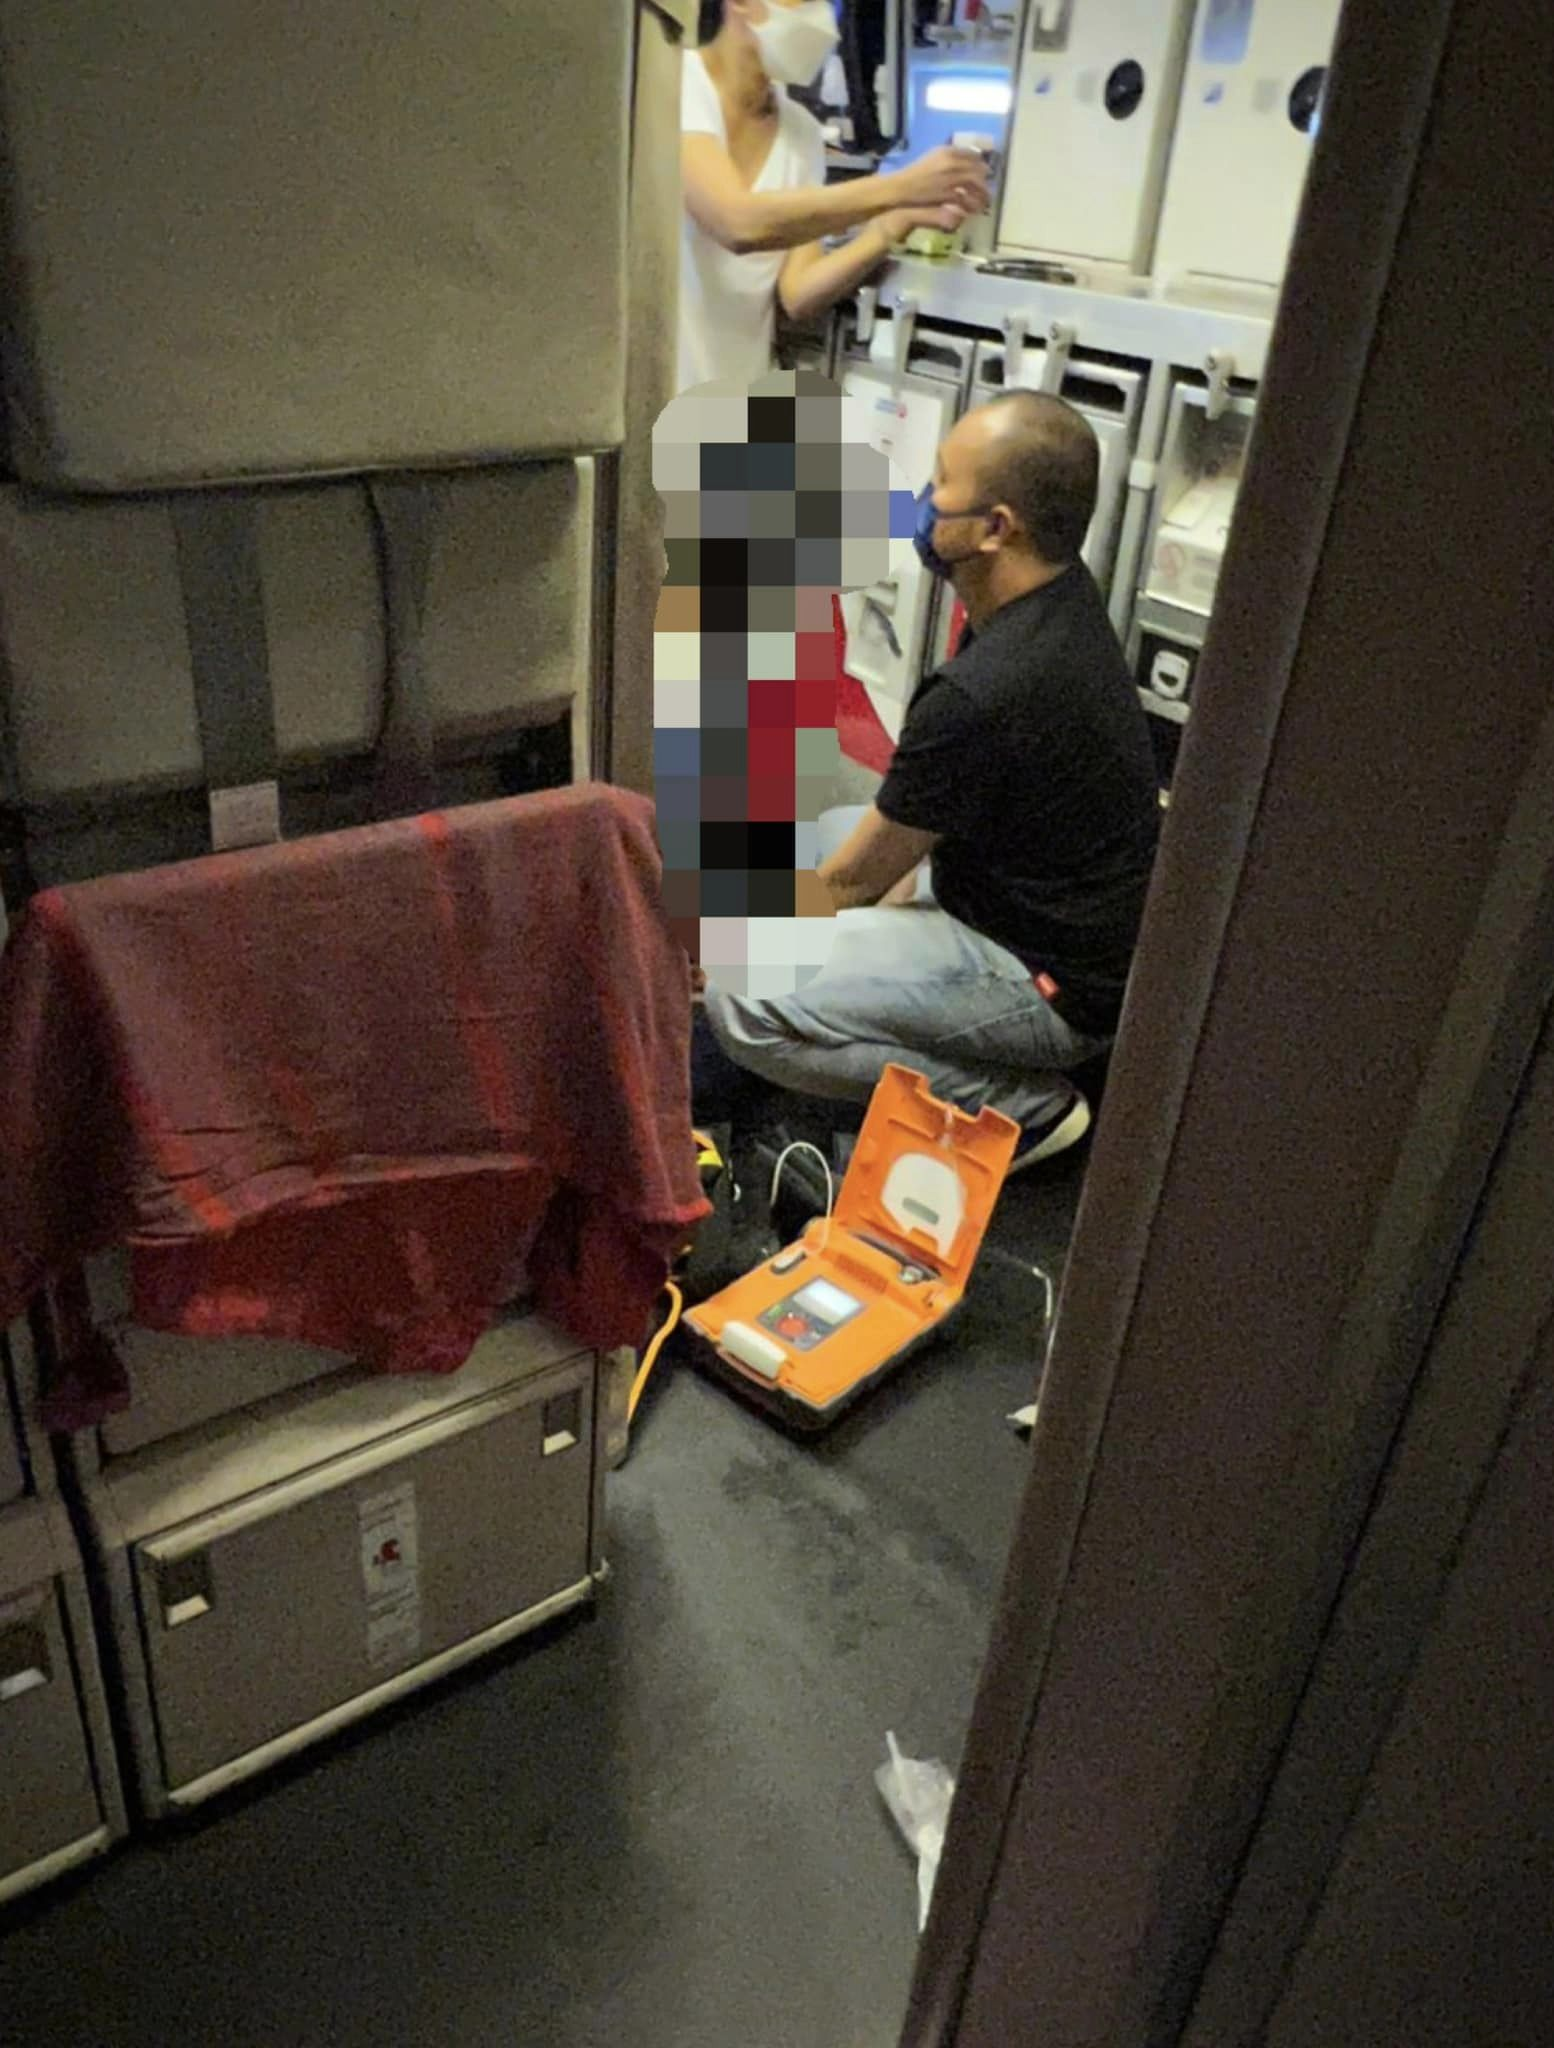 M'sian doctor shares how he helped two passengers while on a flight home from turkey